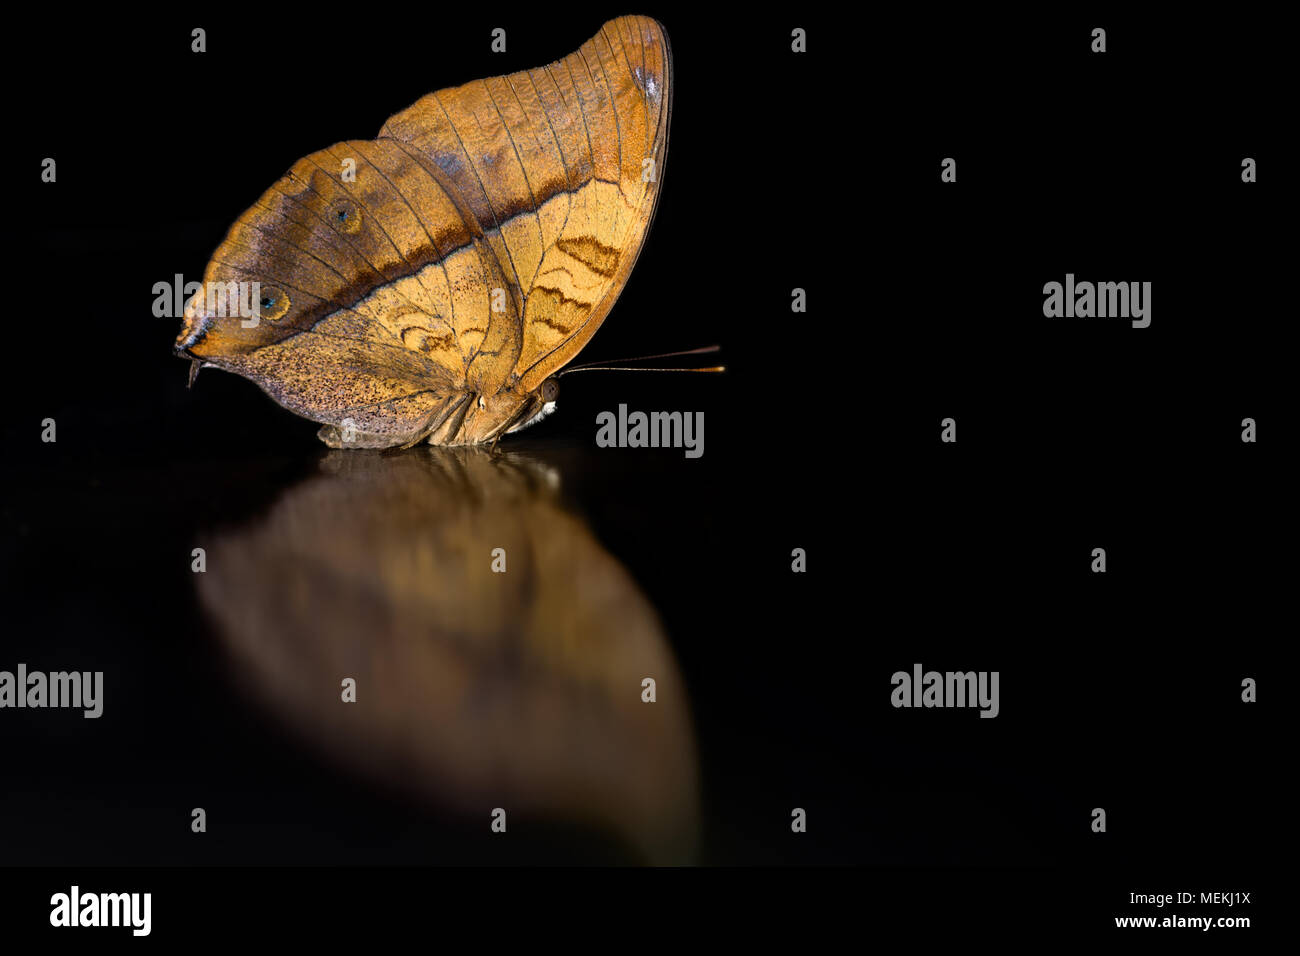 Close-up macro photo of insect Vidula dejone erotella butterfly or the Cruiser Butterfly with symmetrical mirror image on isolated black background. Stock Photo